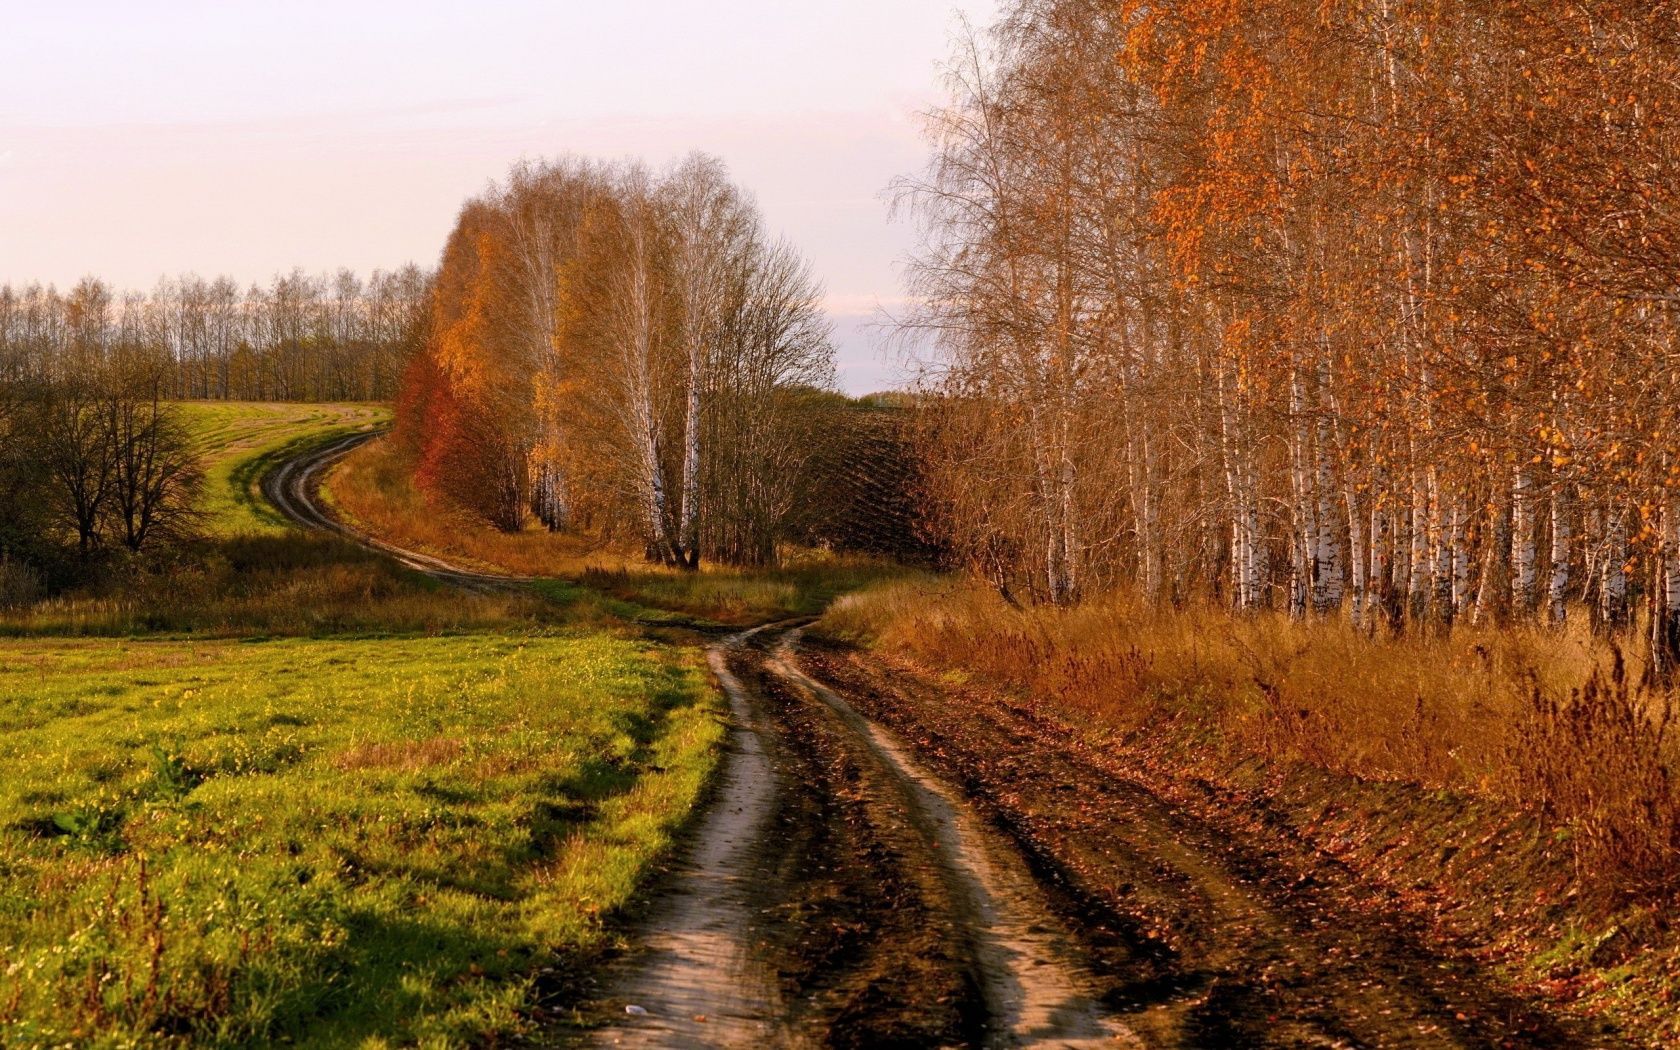 Country Background Imagex1050 Country Road in Autumn desktop PC and Mac wallpaper. Country roads, Country background, Field wallpaper